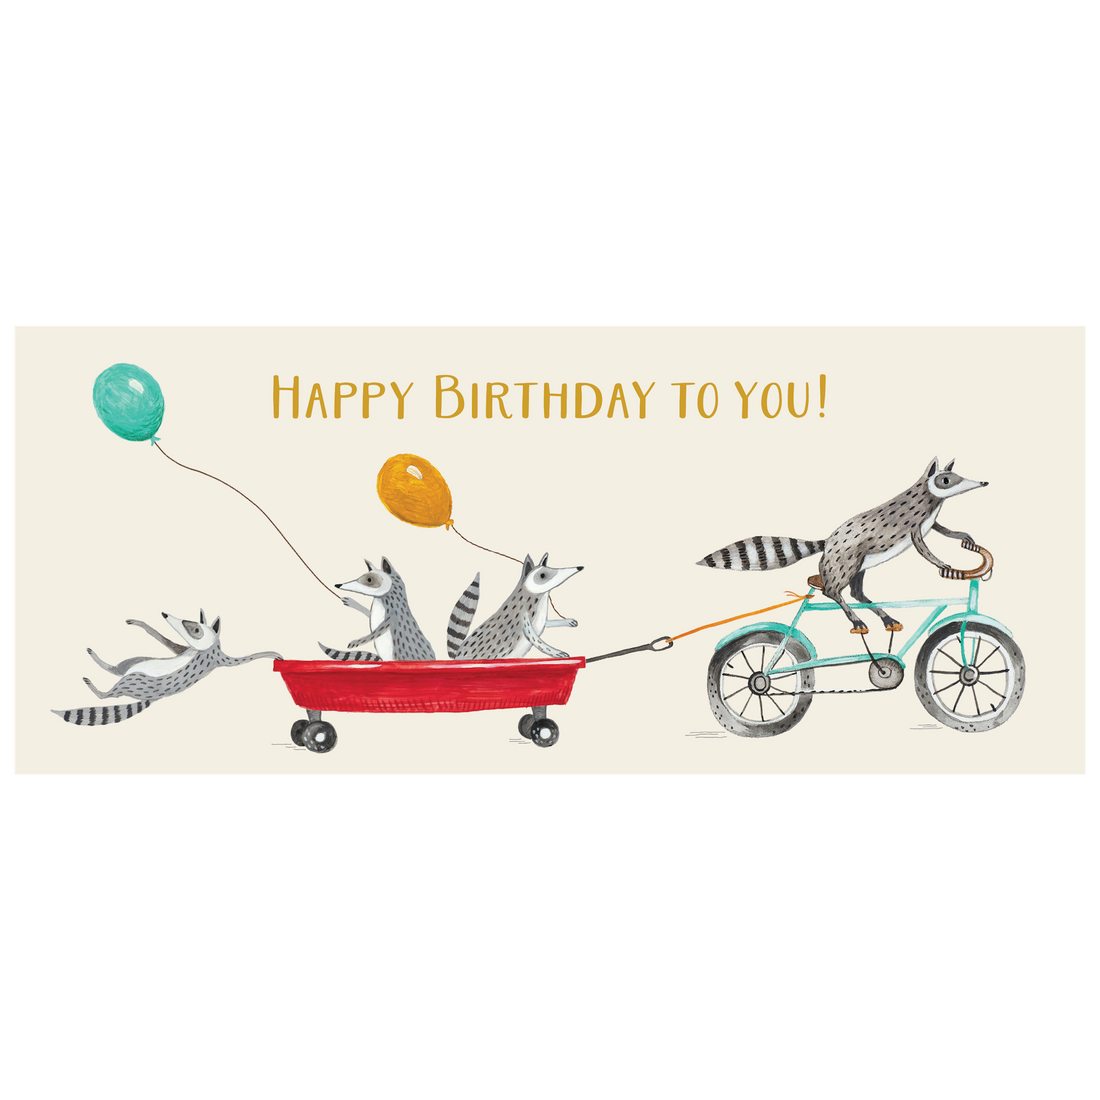 A whimsical illustration of four raccoons zooming by: one is pedaling a teal bicycle, with two holding balloons in a red wagon pulled behind the bike, and the last one hanging on to the wagon, over a cream background, with &quot;Happy Birthday To You!&quot; written in gold across the top of the card.